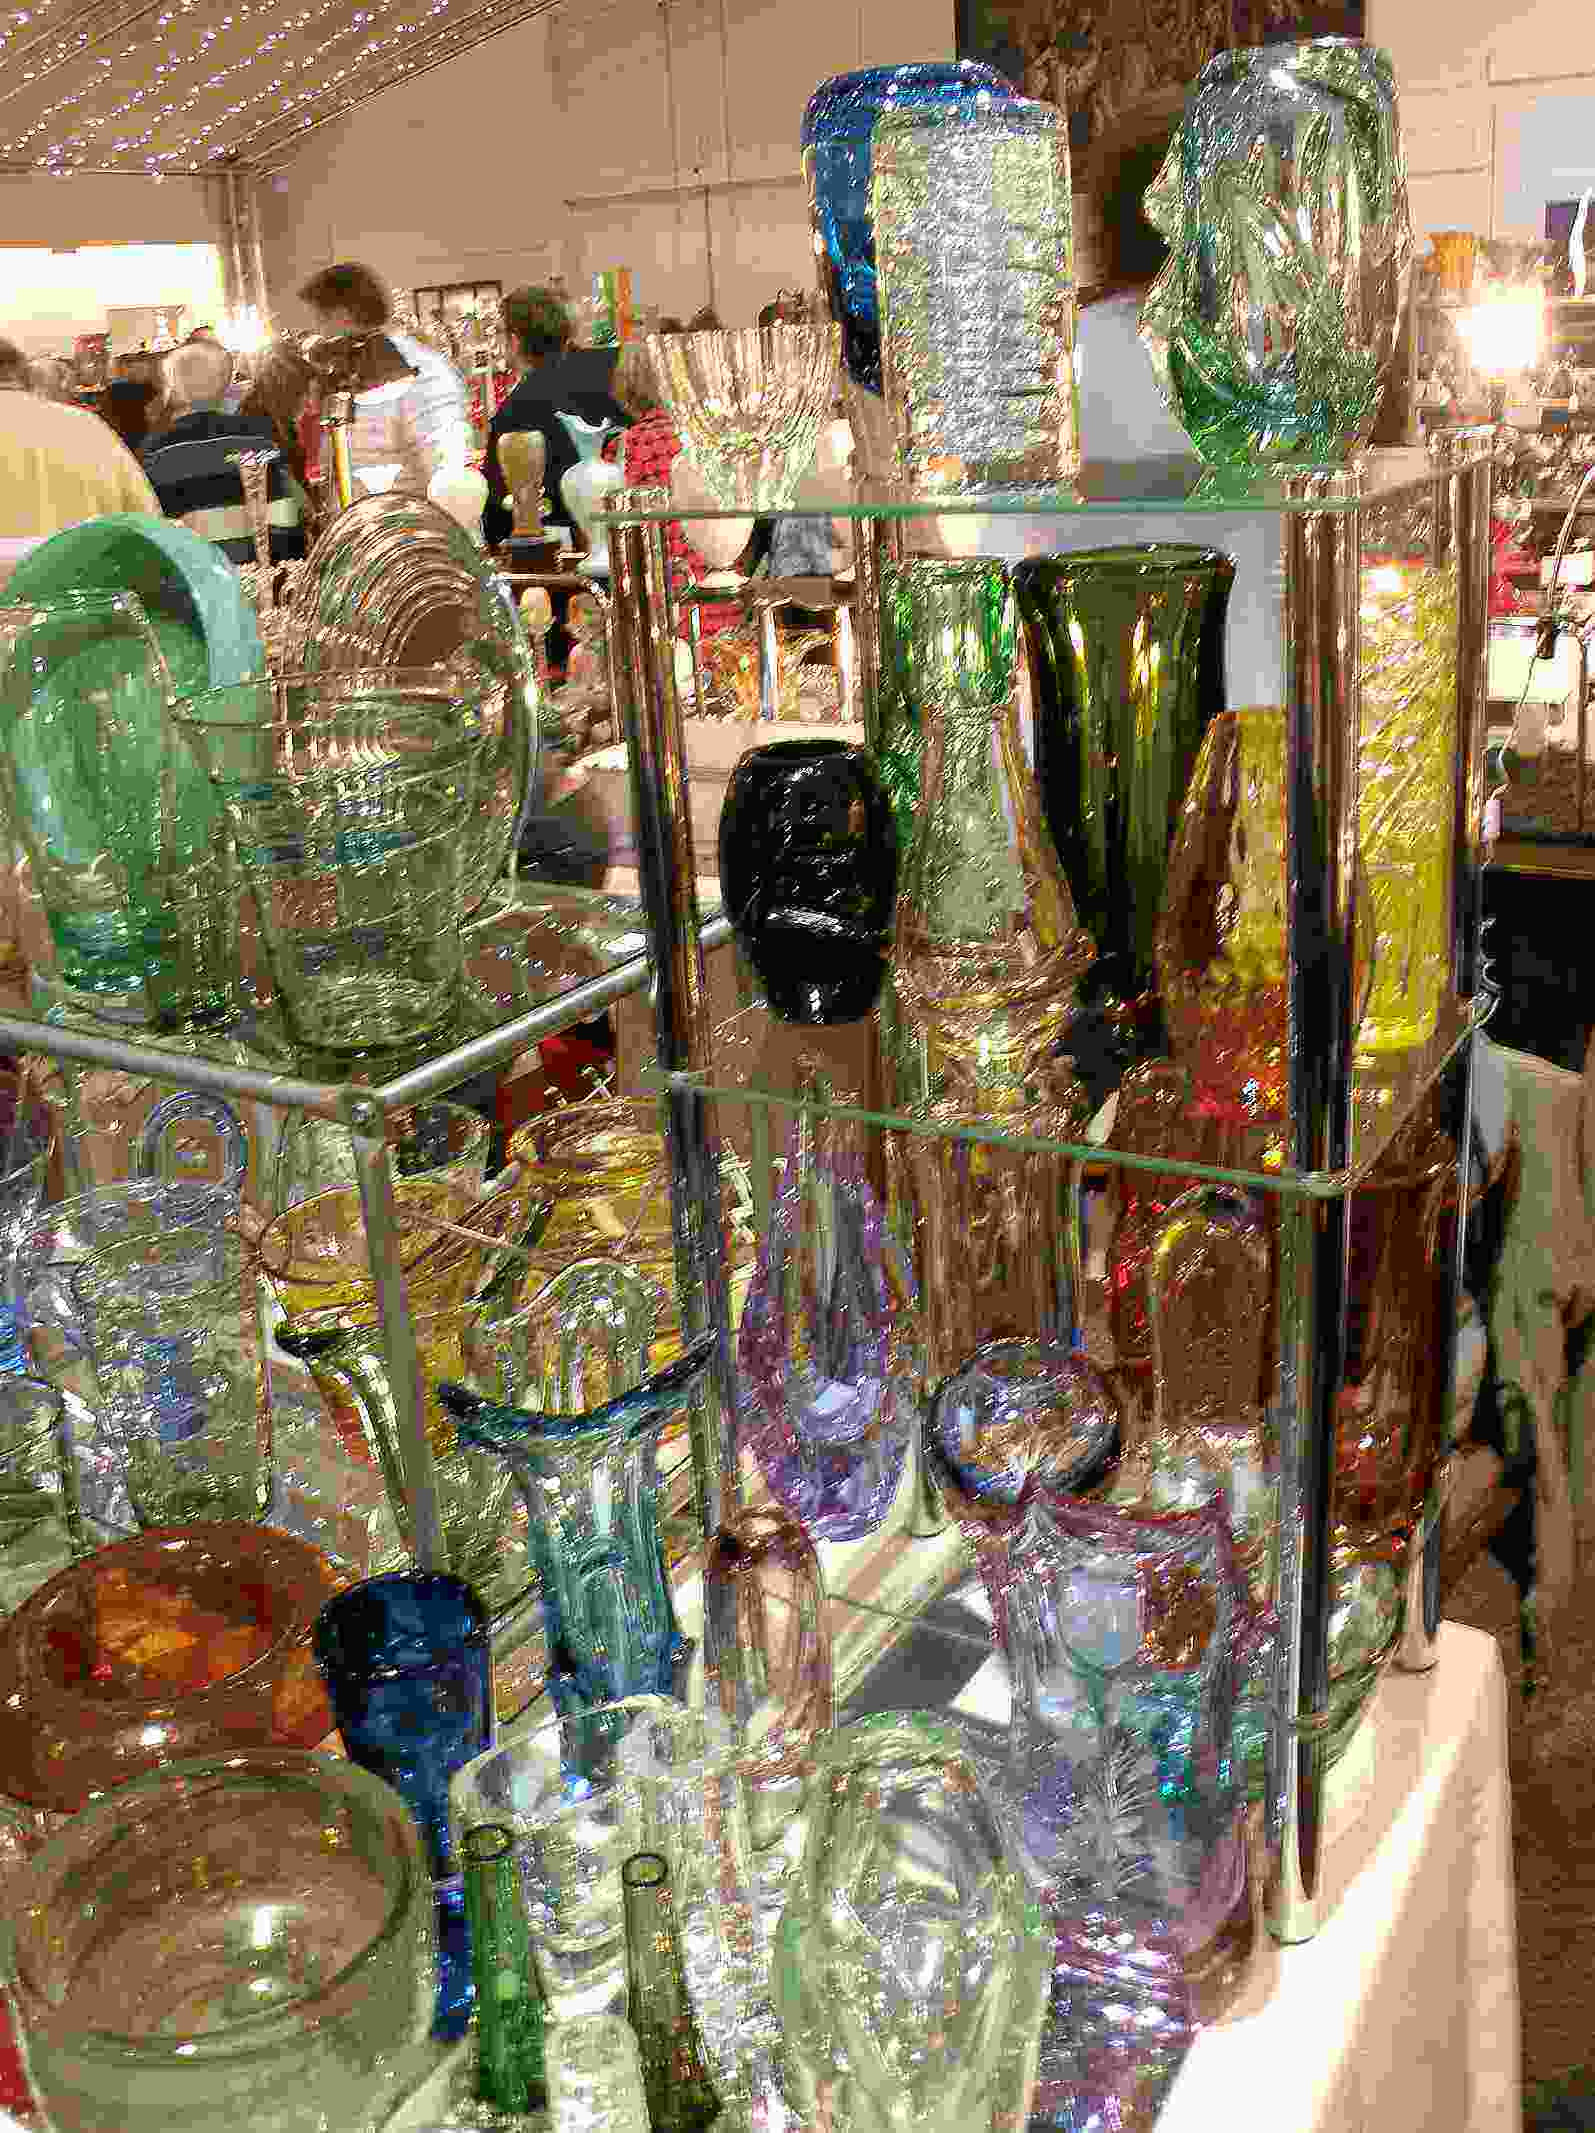 14 Nice Large Sea Glass Vases 2024 free download large sea glass vases of starac289 ac28clac281nky old articles the cambridge glass fair regarding graham also had 1950s skrdlovice designed by emanuel and jaroslav beranek some zbs a lovely 